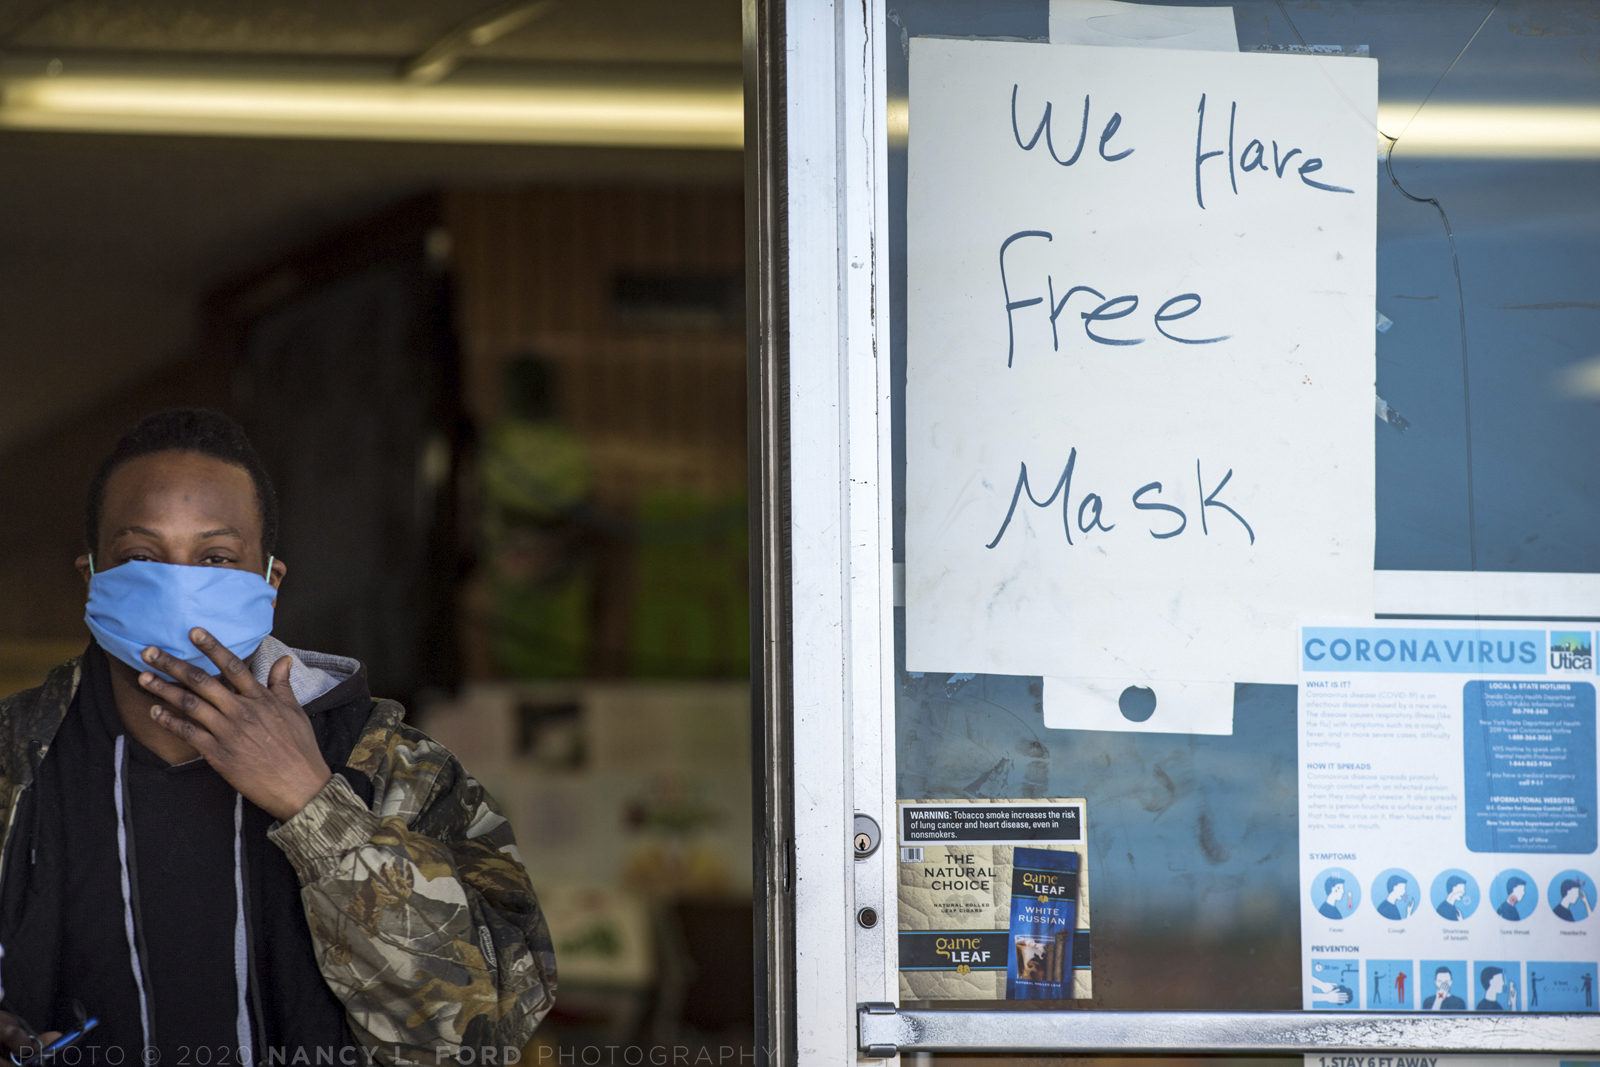 A man leaves the Eagle St. Express Market where they are giving away free masks on Saturday, April 25, 2020 in Utica, NY during the Covid-19 pandemic lockdown in New York State.  (Copyright © 2020 Nancy L. Ford Photography)